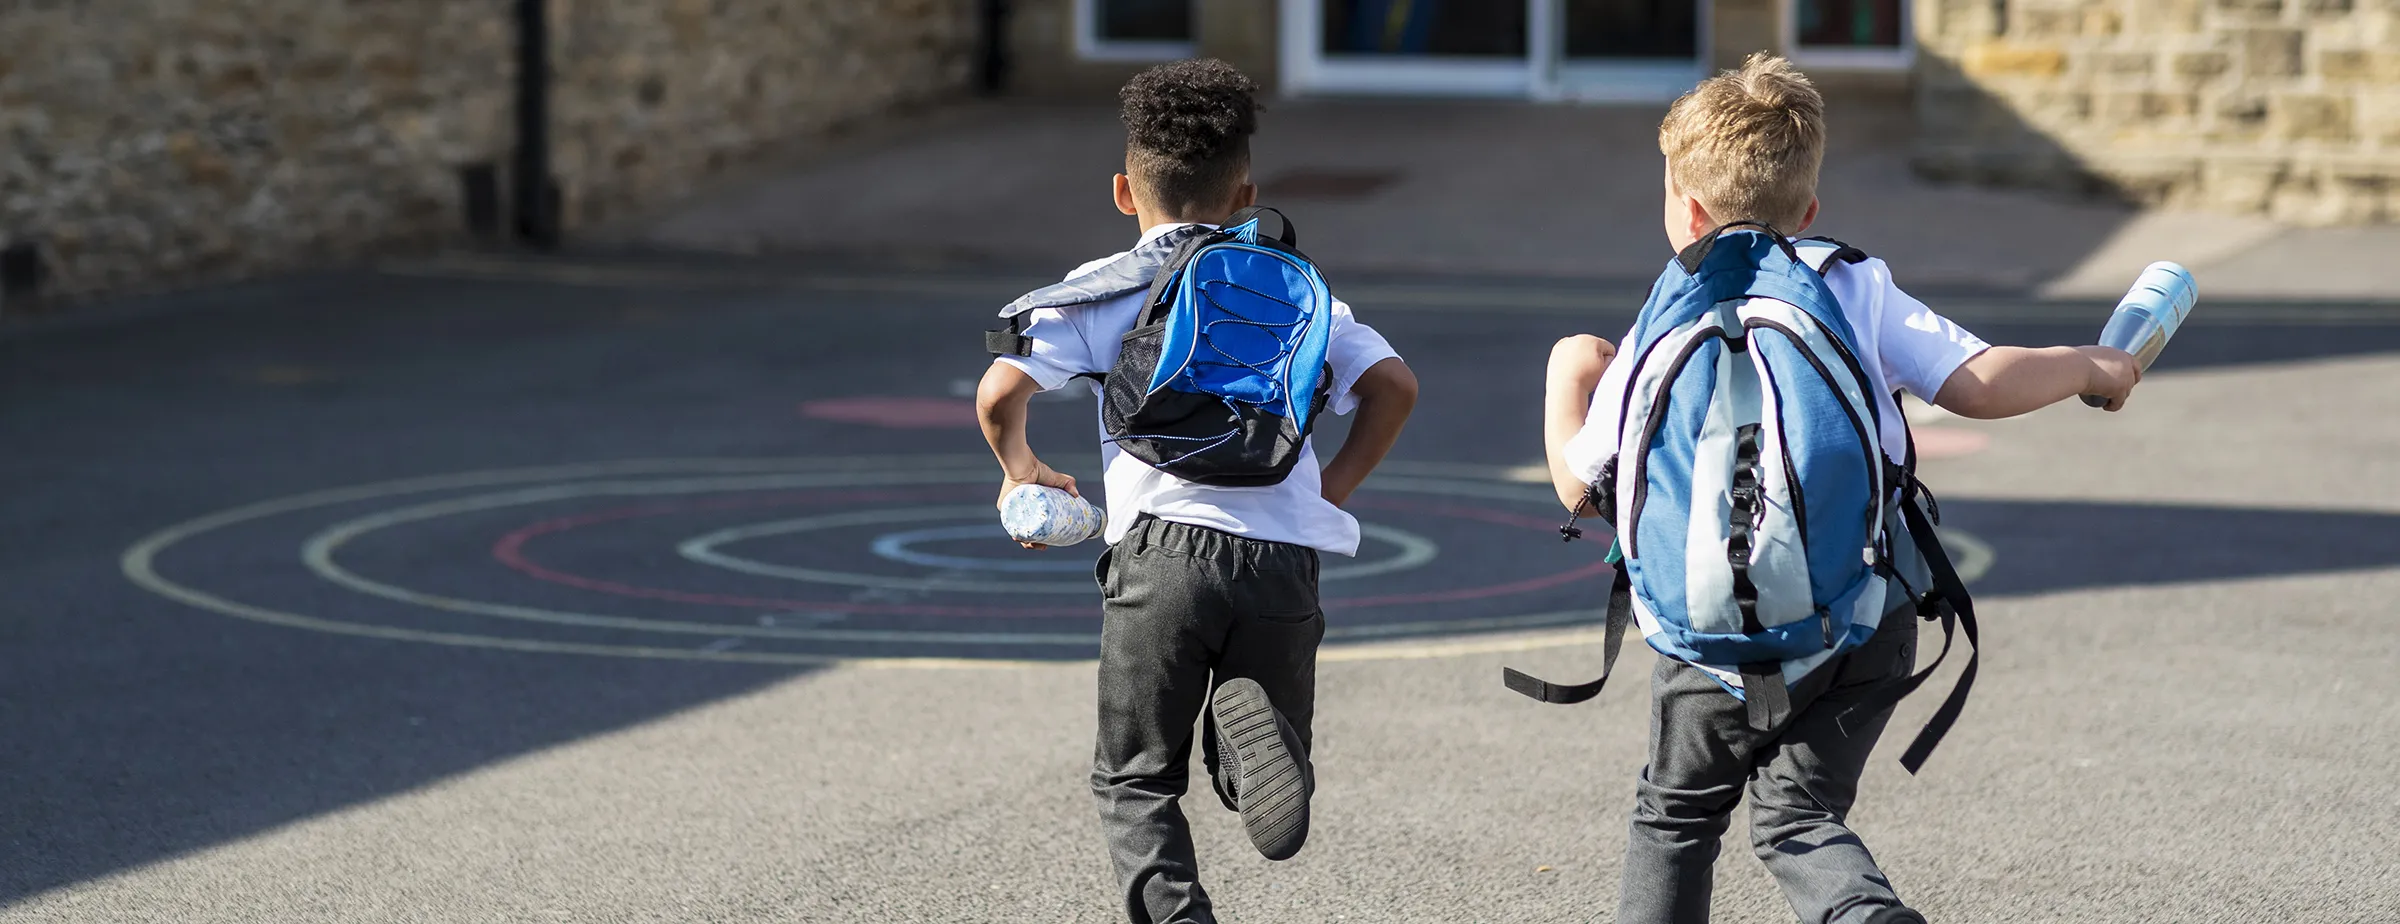 Two young children running into school